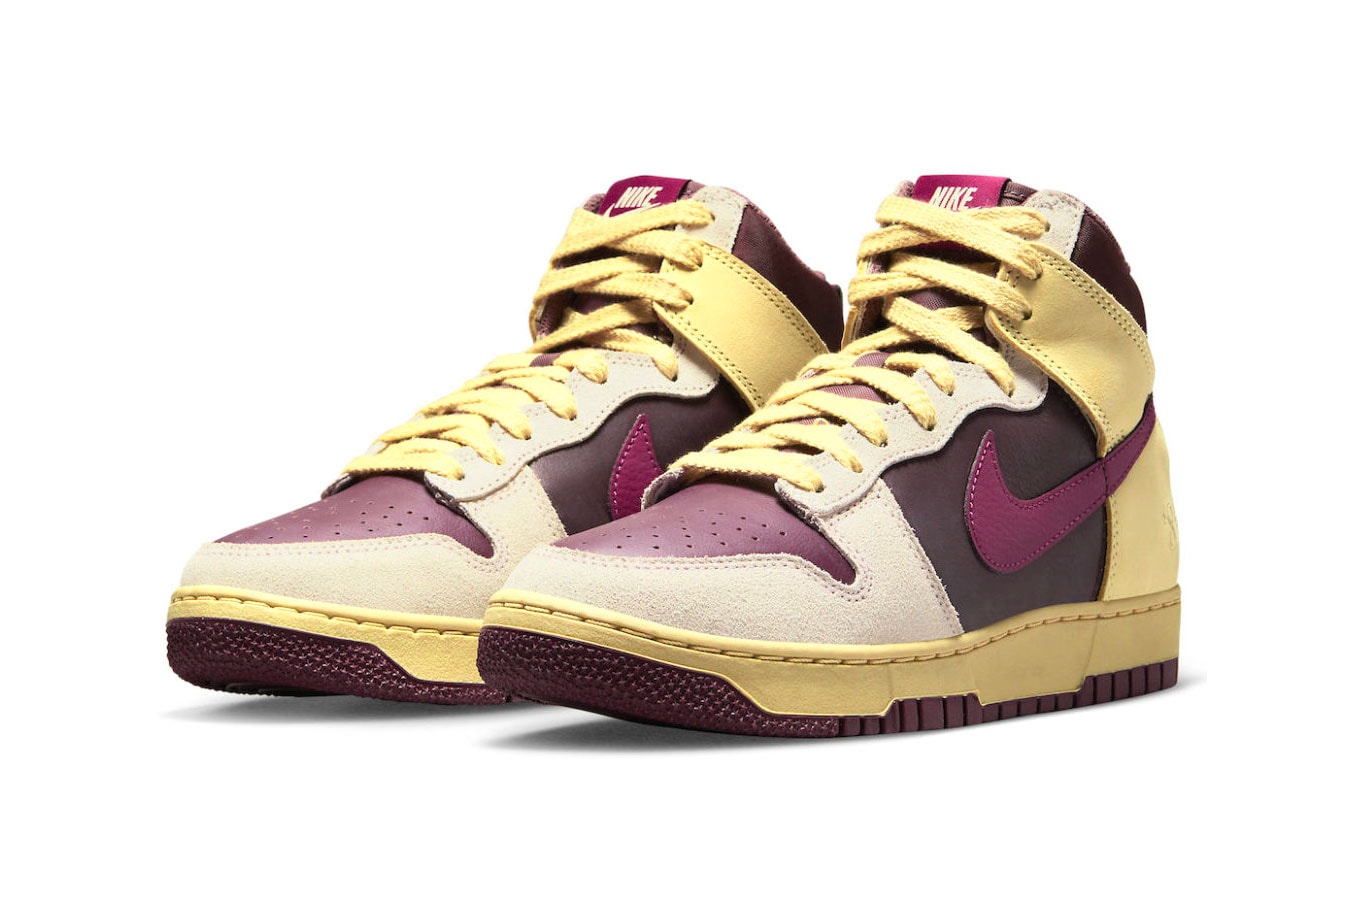 Nike Dunkd High 1985 valentines day 85 alabaster rosewood earth night maroon FD0794 700 140 usd release info date pricec